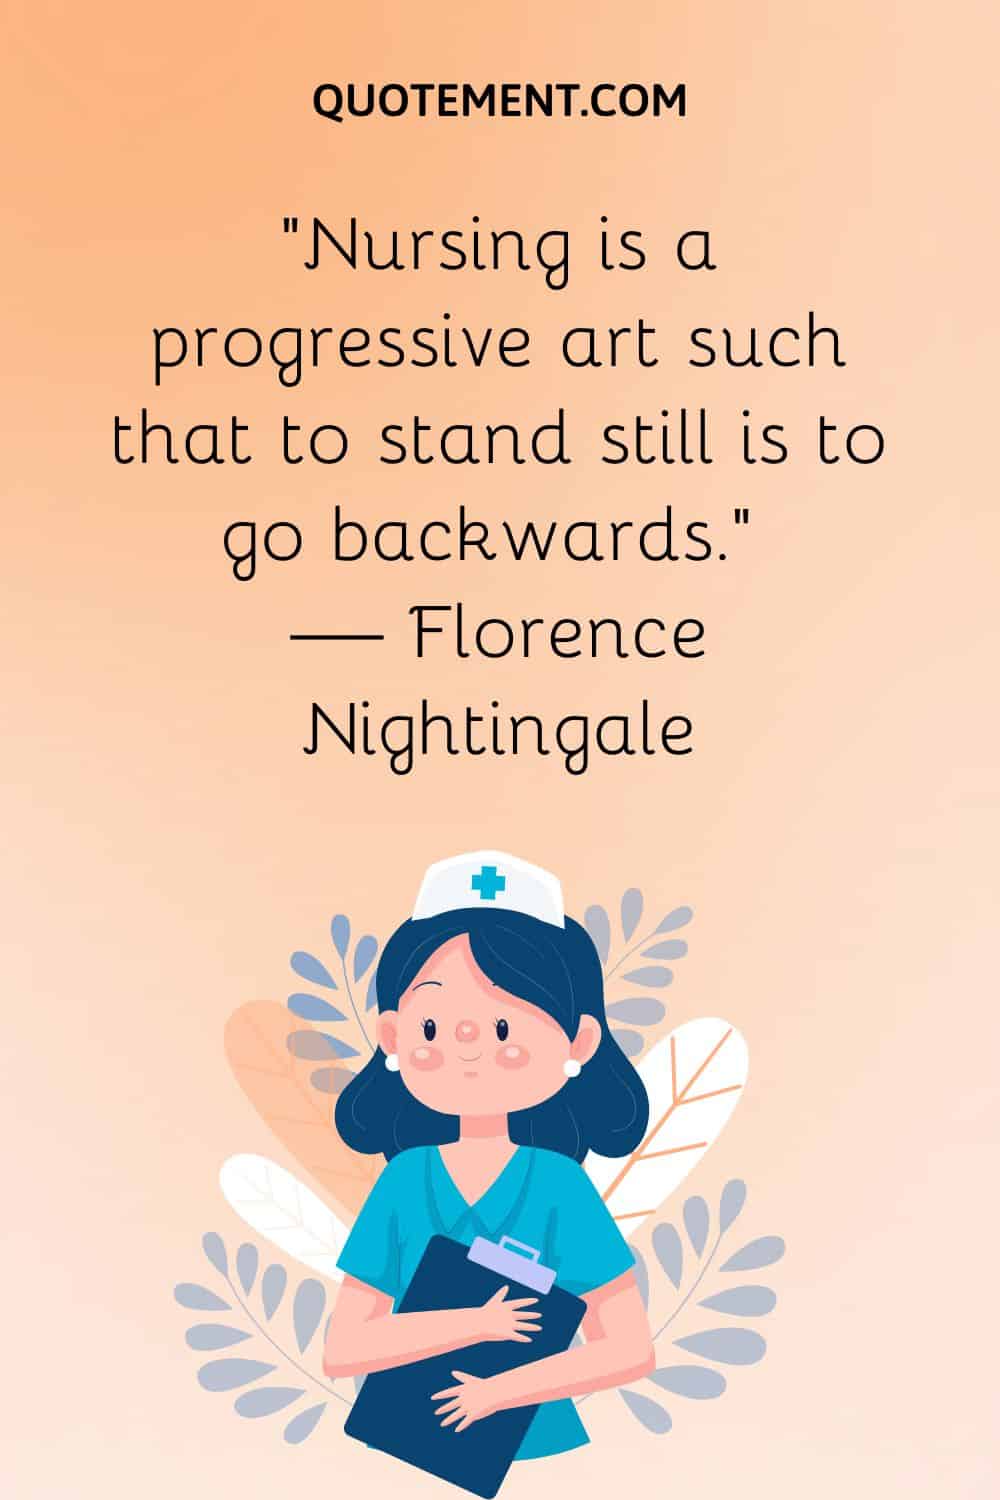 “Nursing is a progressive art such that to stand still is to go backwards.” — Florence Nightingale